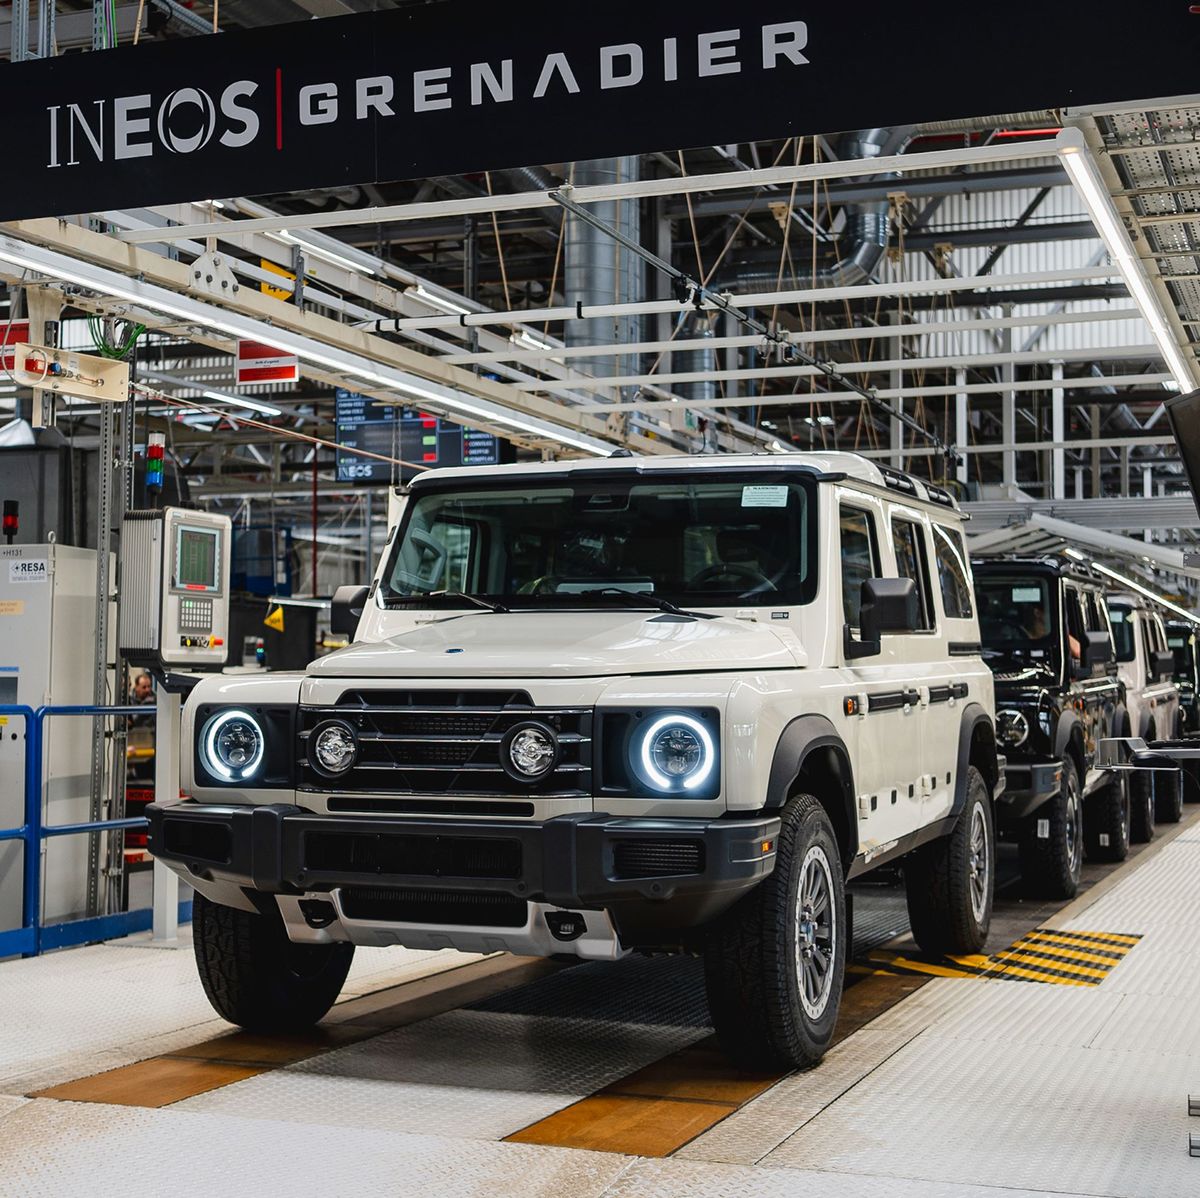 Ineos Grenadiers Are on the Way, but Is the Price Right?